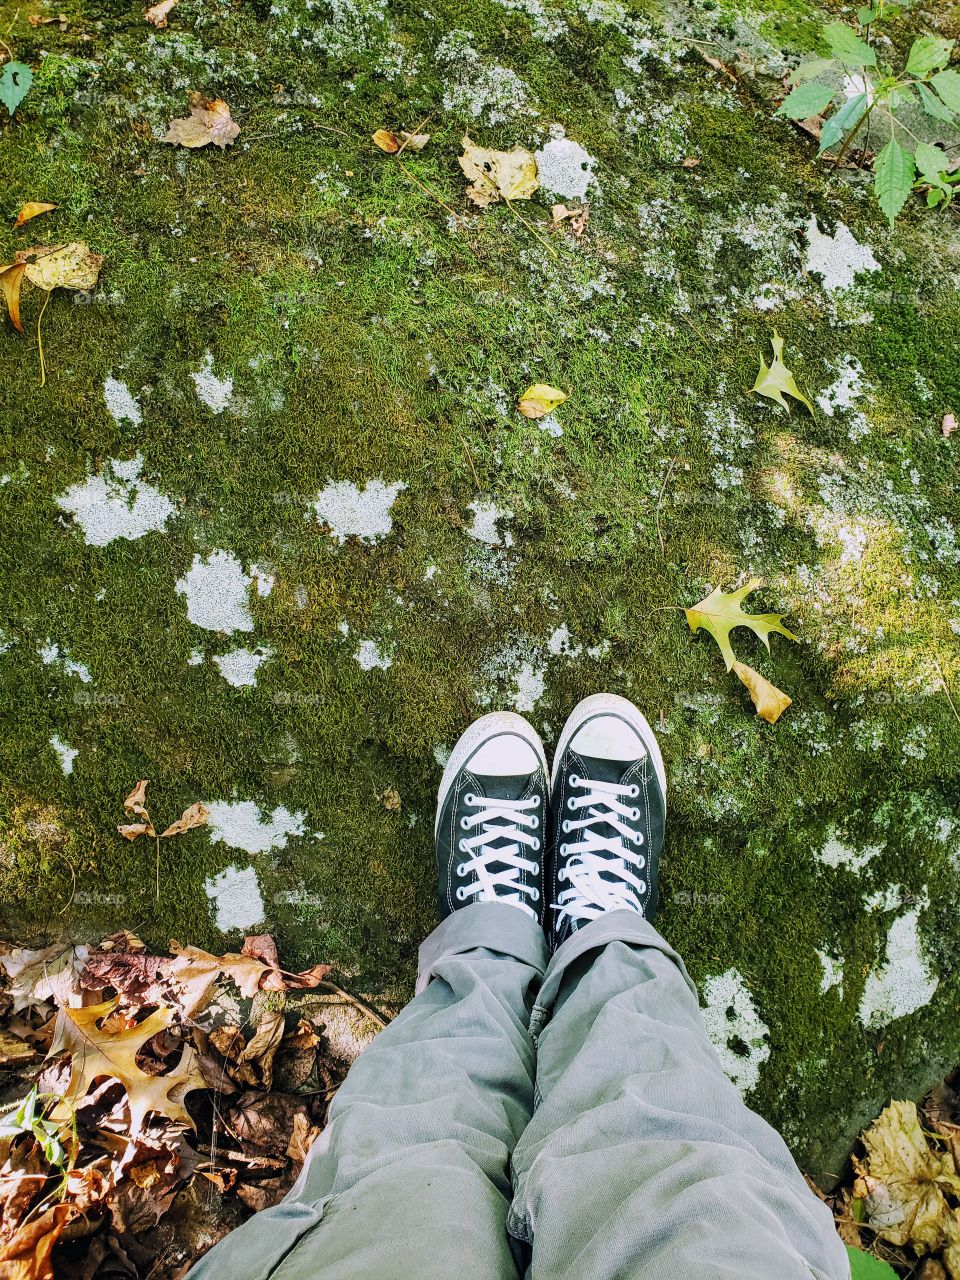 Rocks and moss and sneakers and socks. Green and bright and leaves and light.